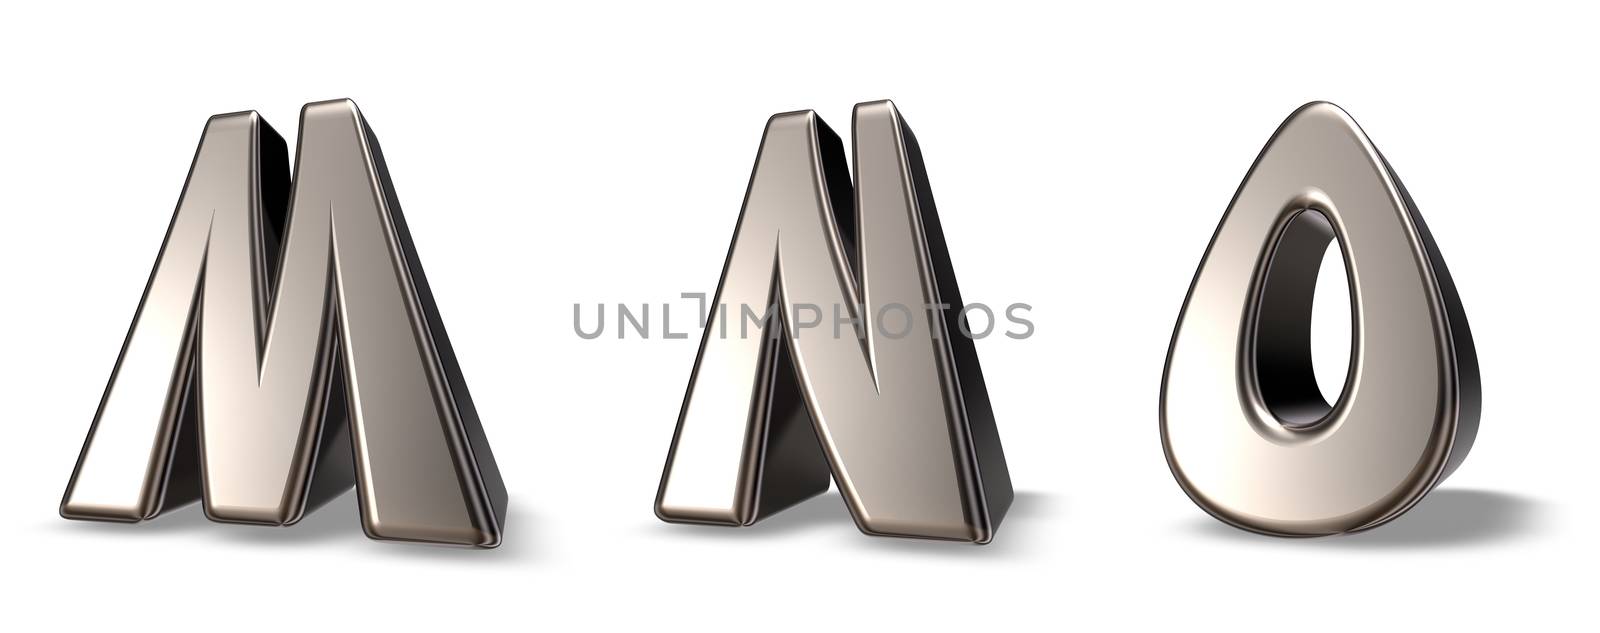 metal letters mno on white background - 3d illustration